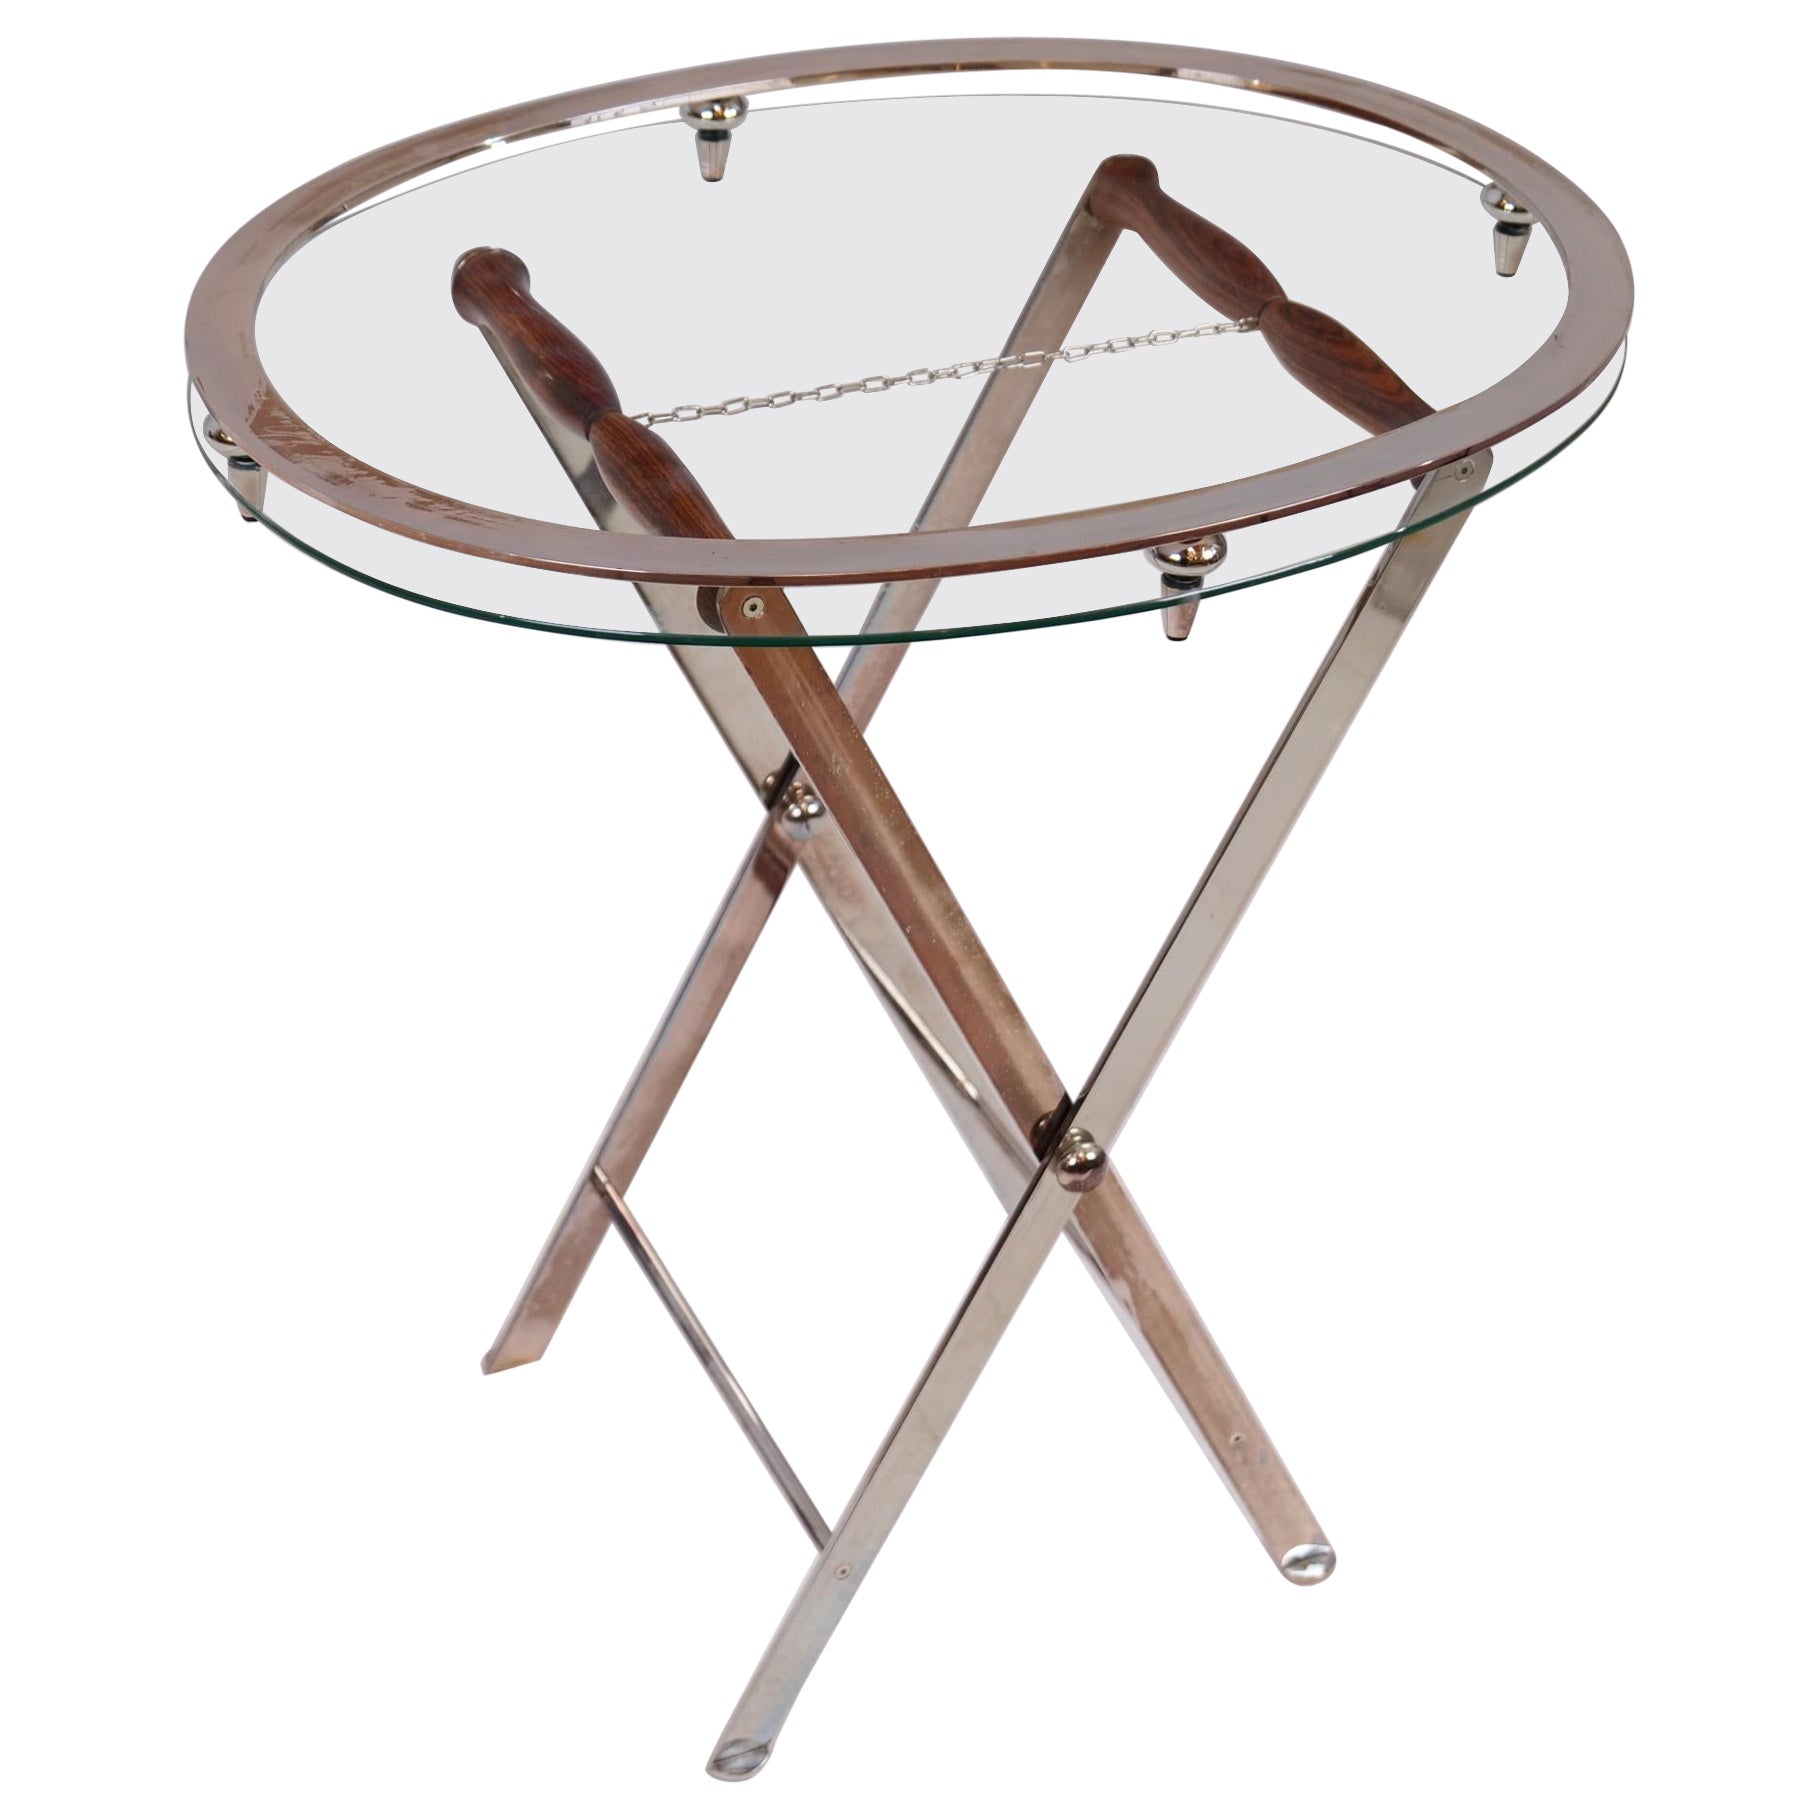 High quality silver plated vintage serving table with removable top For Sale